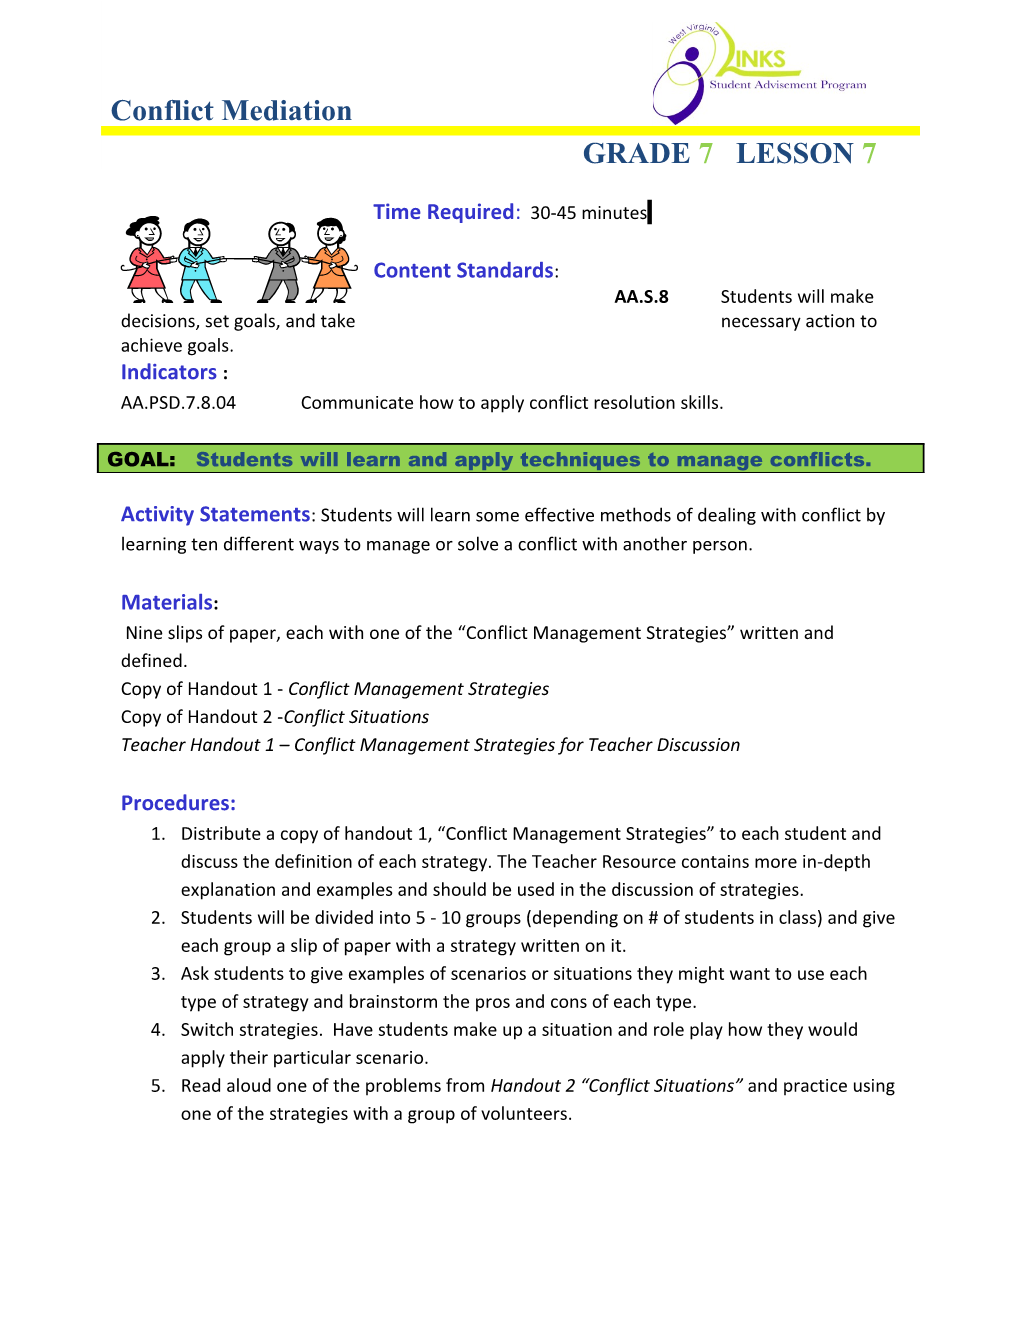 Conflict Mediation GRADE 7 LESSON 7 Time Required: 30-45 Minutes